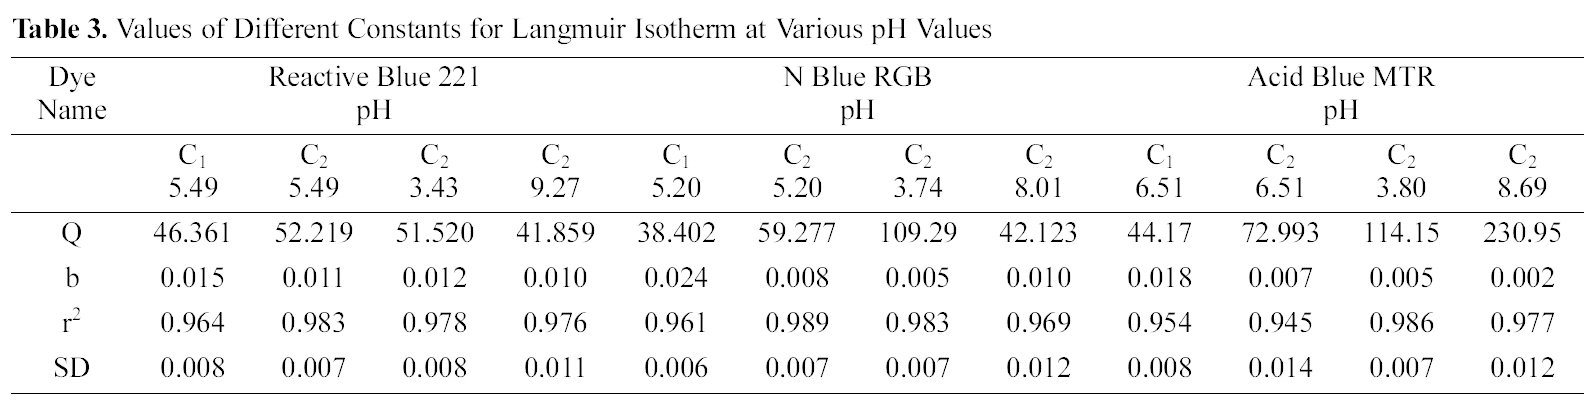 Values of Different Constants for Langmuir Isotherm at Various pH Values